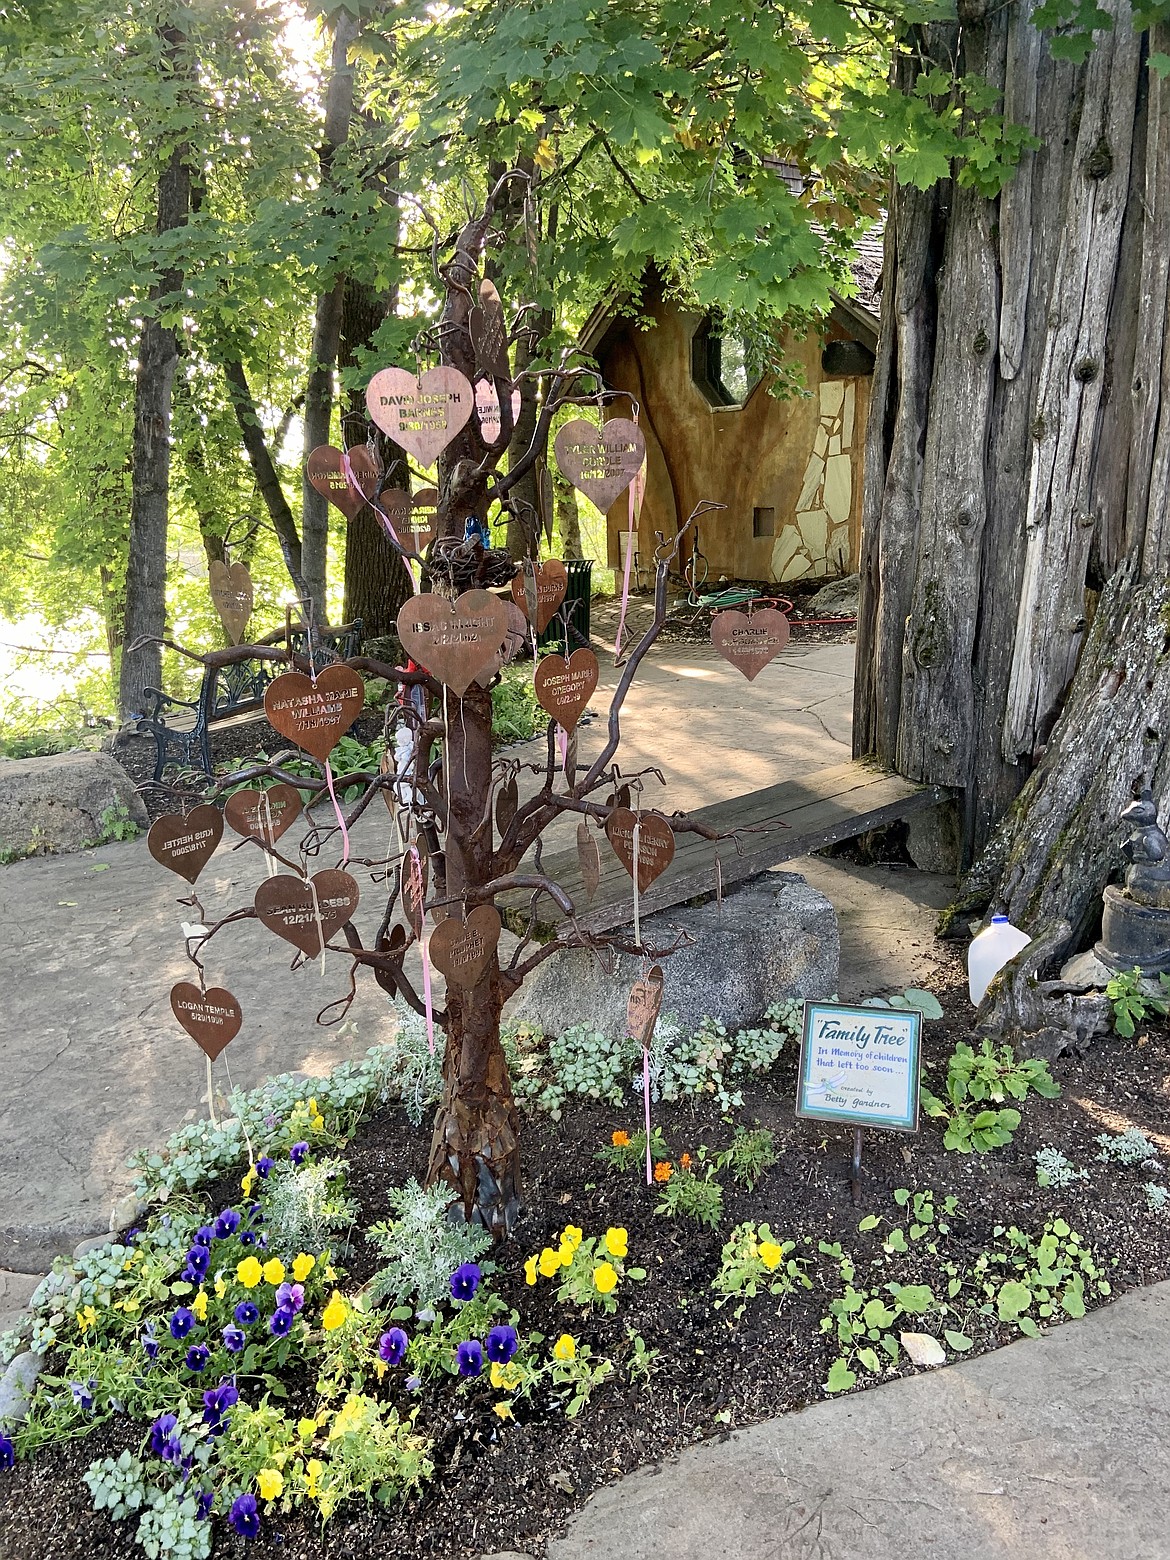 The family tree, located in the Healing Garden, commemorates children who passed. It is the collaborative work of community members, artist and Hospice volunteer Betty Gardener and Bonner General Health Community Hospice. The leaves display the child's name and their date of birth. Anyone wishing to add a leaf in memory of a child  or a name on the Memorial Wall is invited to do so. There is a $50.00 donation is suggested to add a leaf to the family tree, and a $100 donation suggested for the Memorial Wall. Funds go toward Bonner Community Hospice. Bonner Community Hospice can be reached at 208-265-1179.